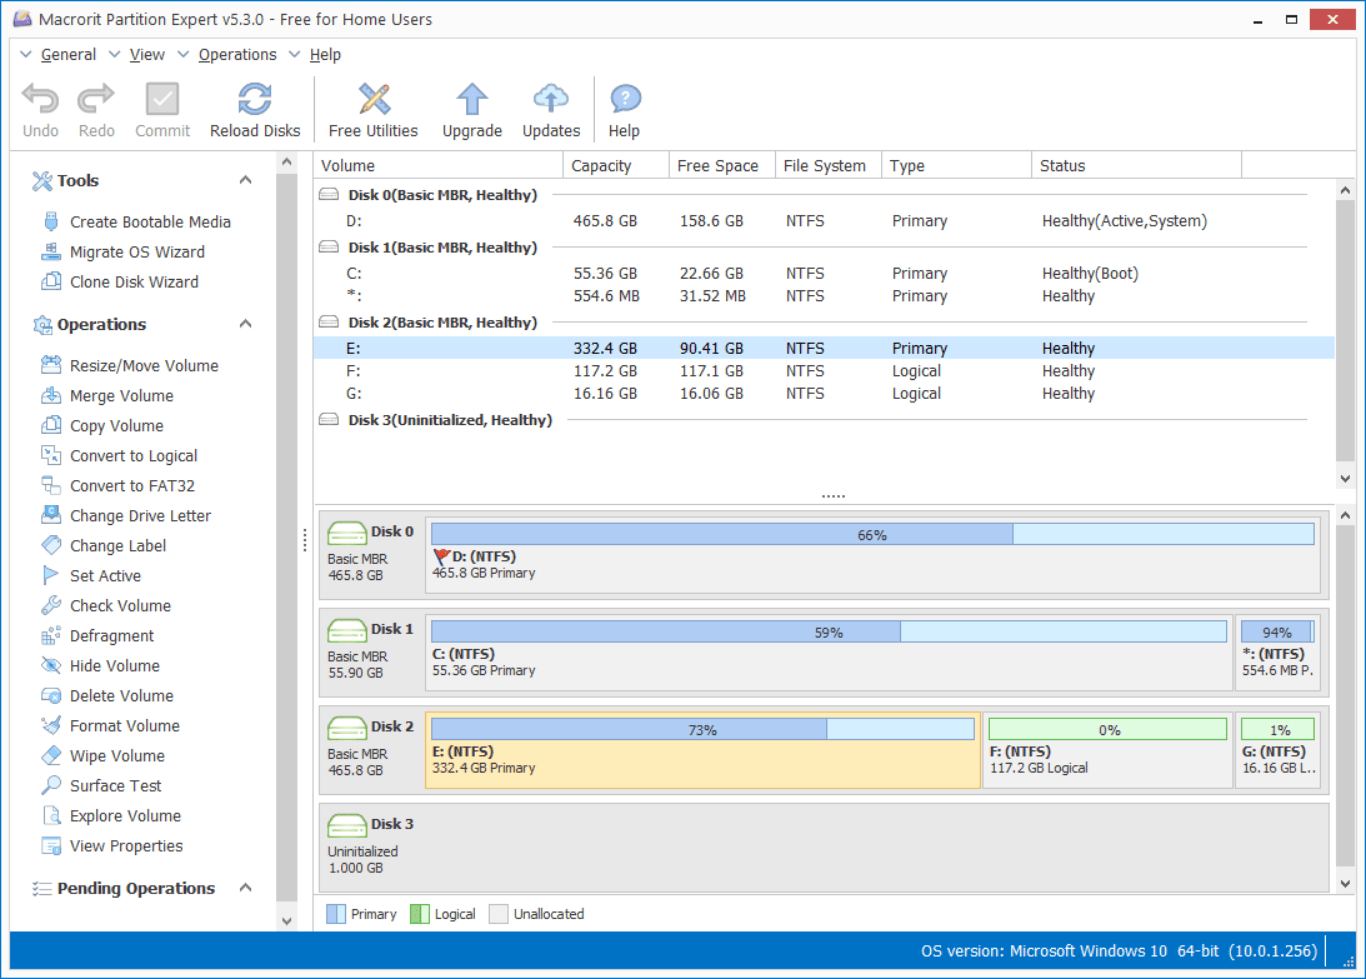 use macrorit partition expert to manage partition